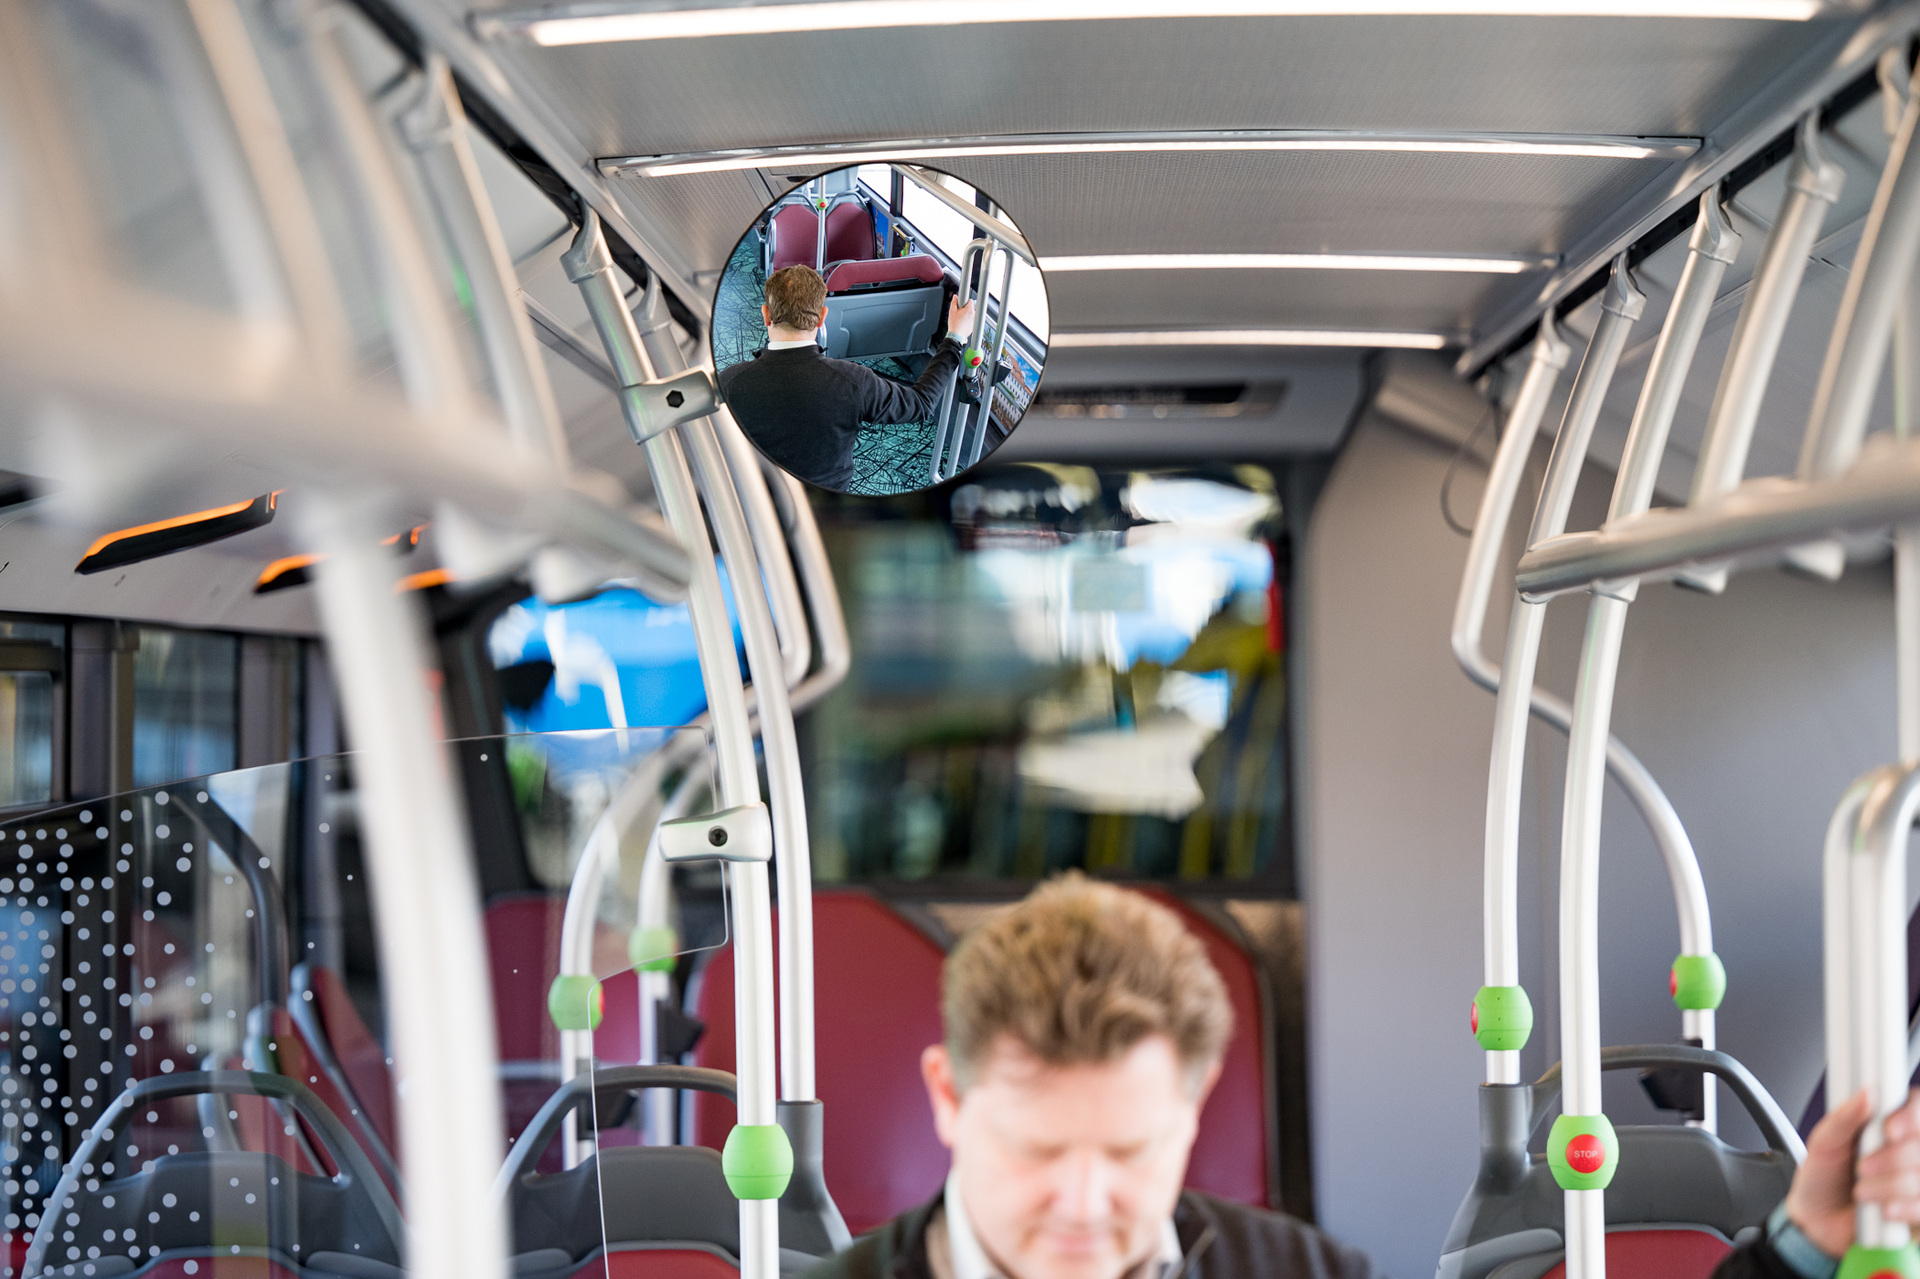 Spillmann wants to make buses the figurative mark of local public transportation